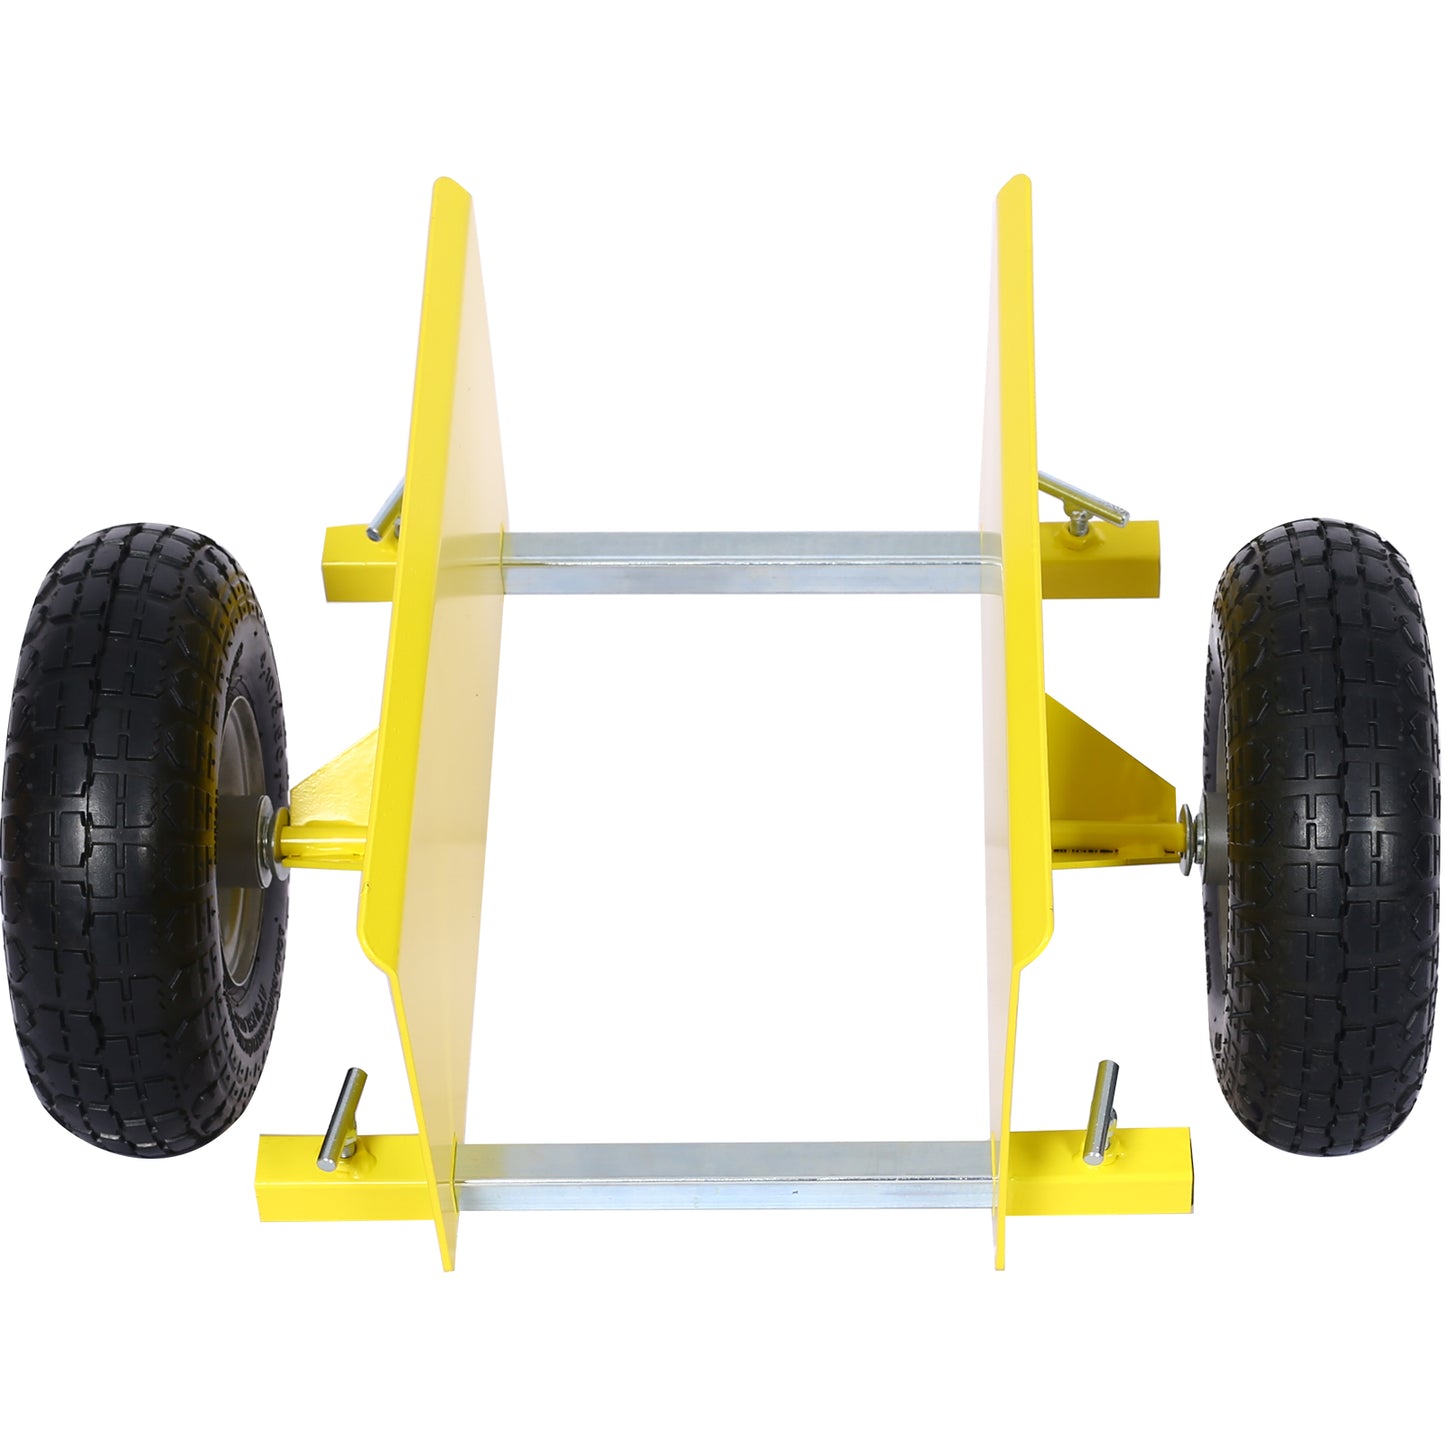 600lb Panel Dolly , 10in. Pneumatic Wheels,yellow